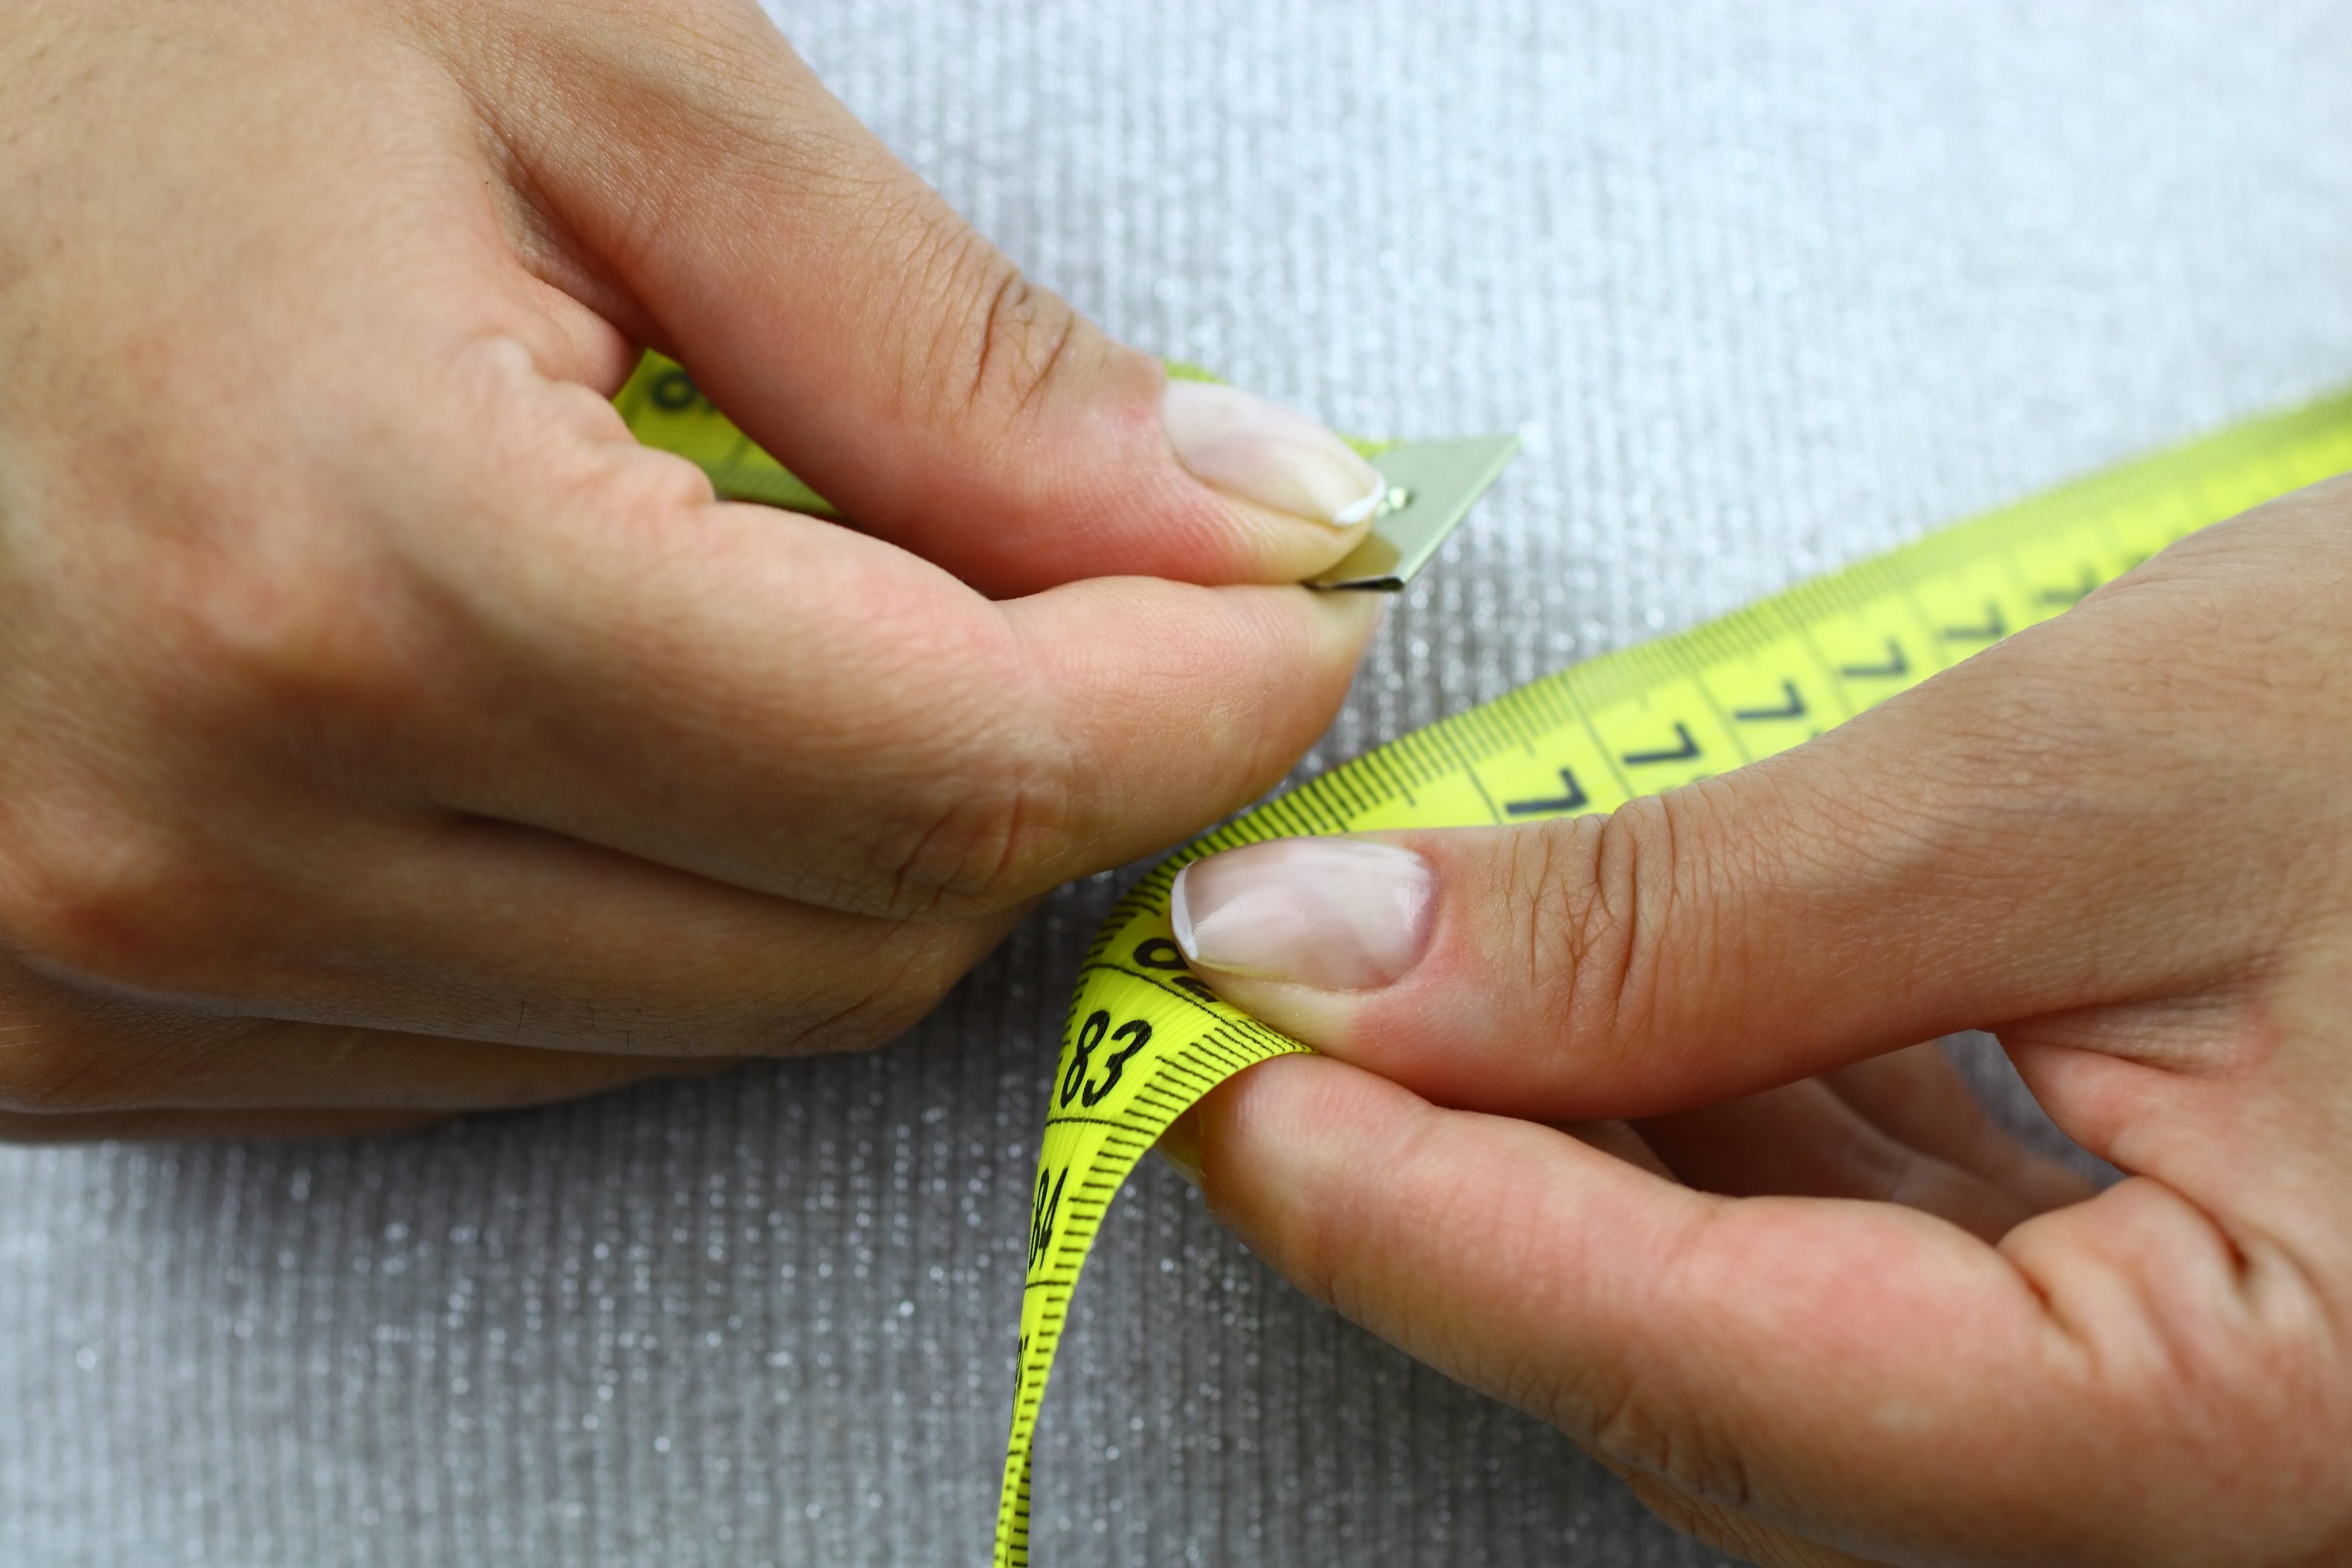 Person measuring their waste line